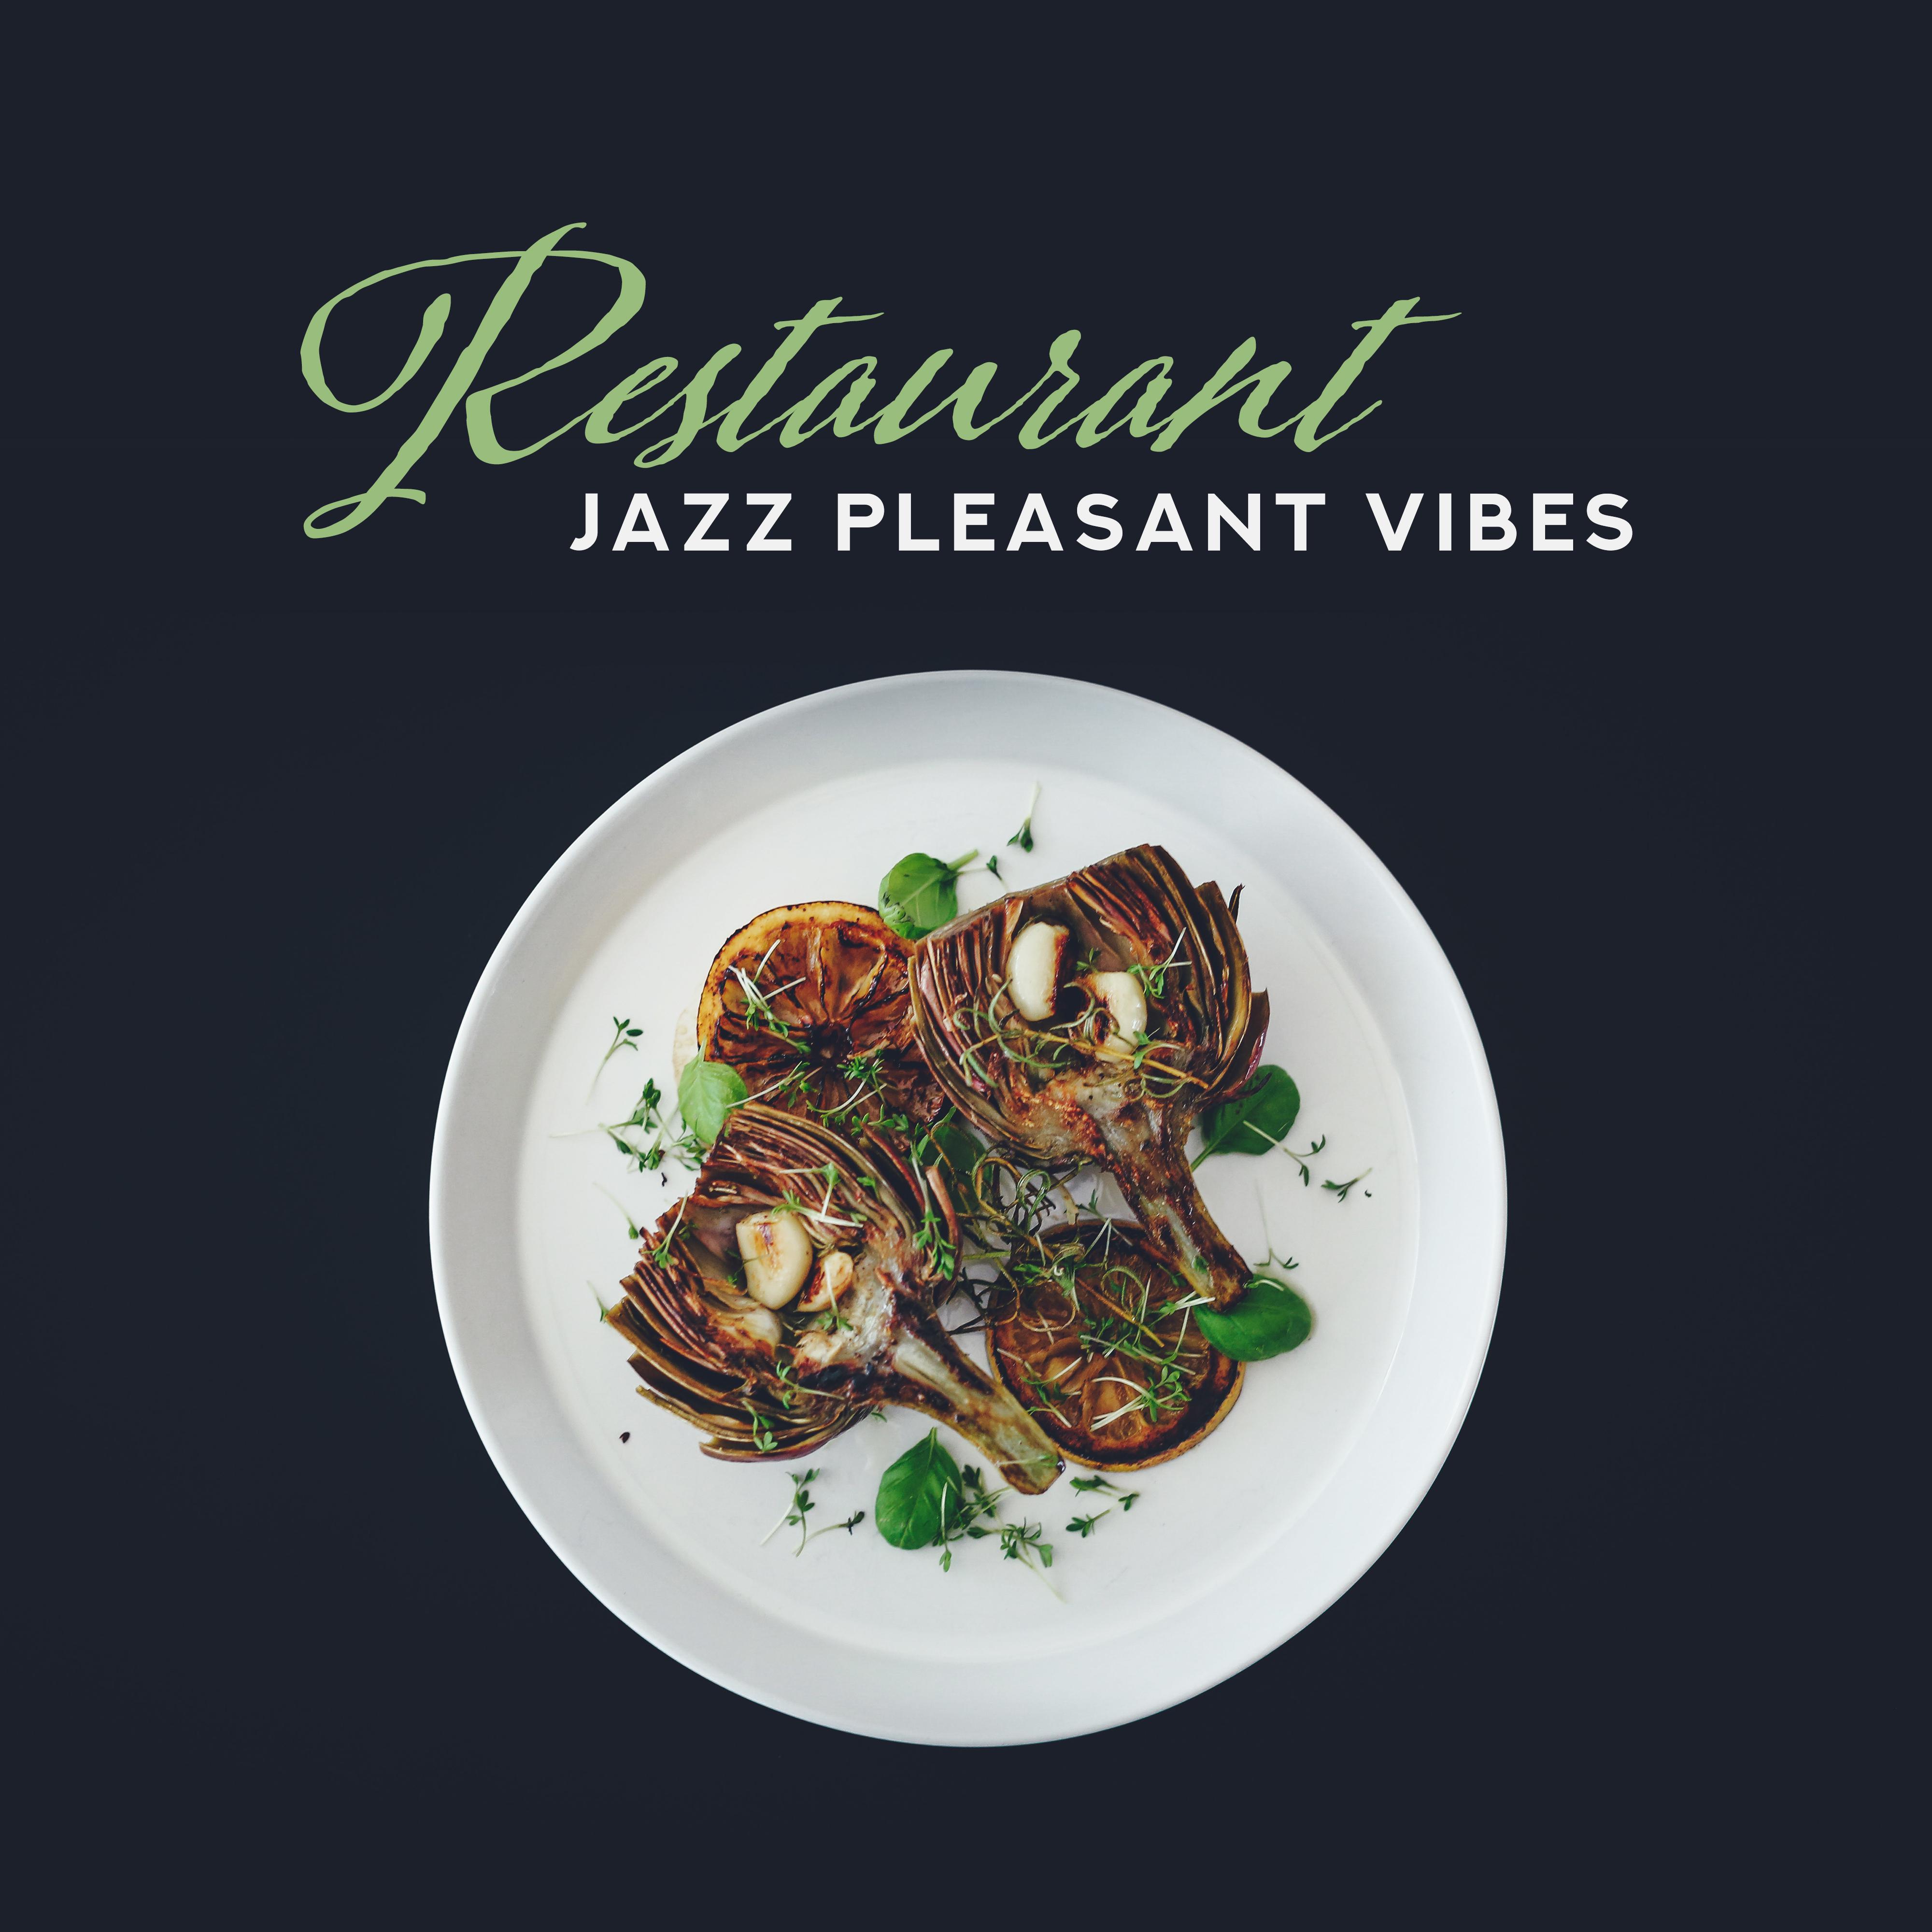 Restaurant Jazz Pleasant Vibes: Smooth Instrumental Jazz 2019 Music, Compilation of Perfect Tracks for Restaurant' s Background, Dinner or Lunch Songs